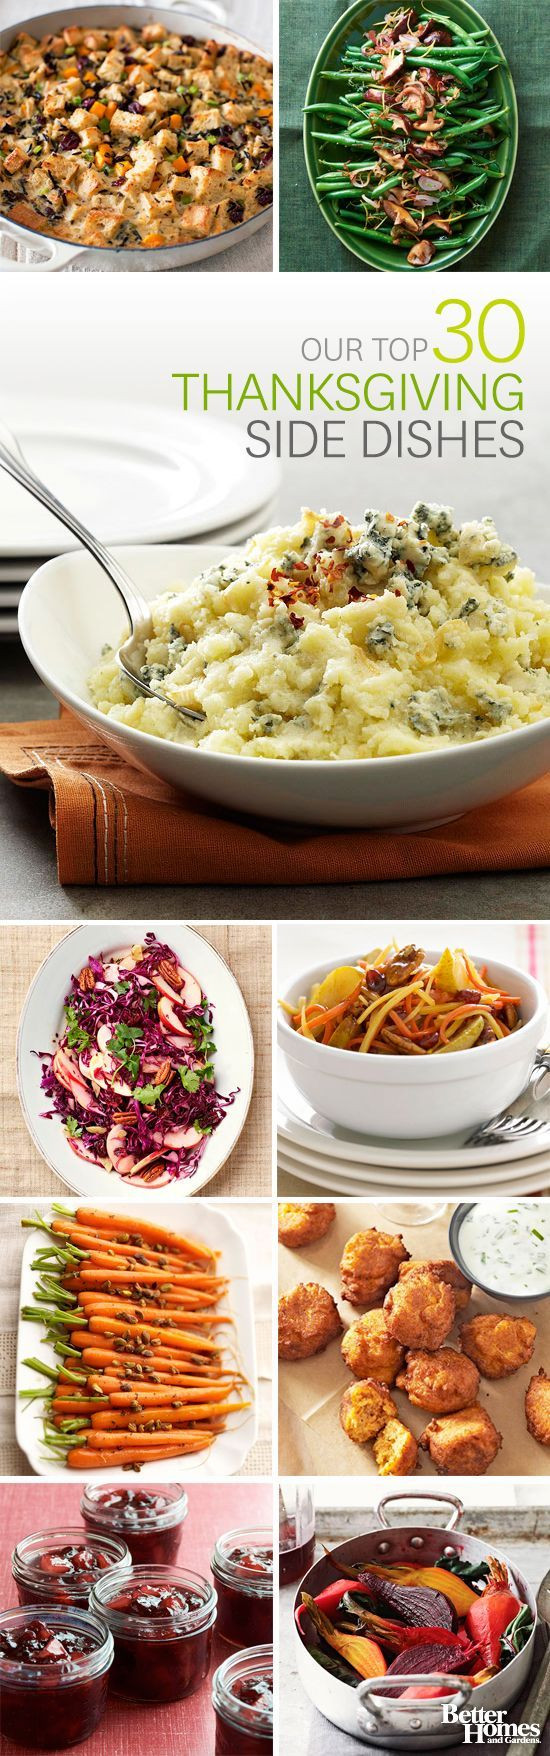 Thanksgiving Side Dishes Make Ahead
 Make Ahead Holiday Side Dishes